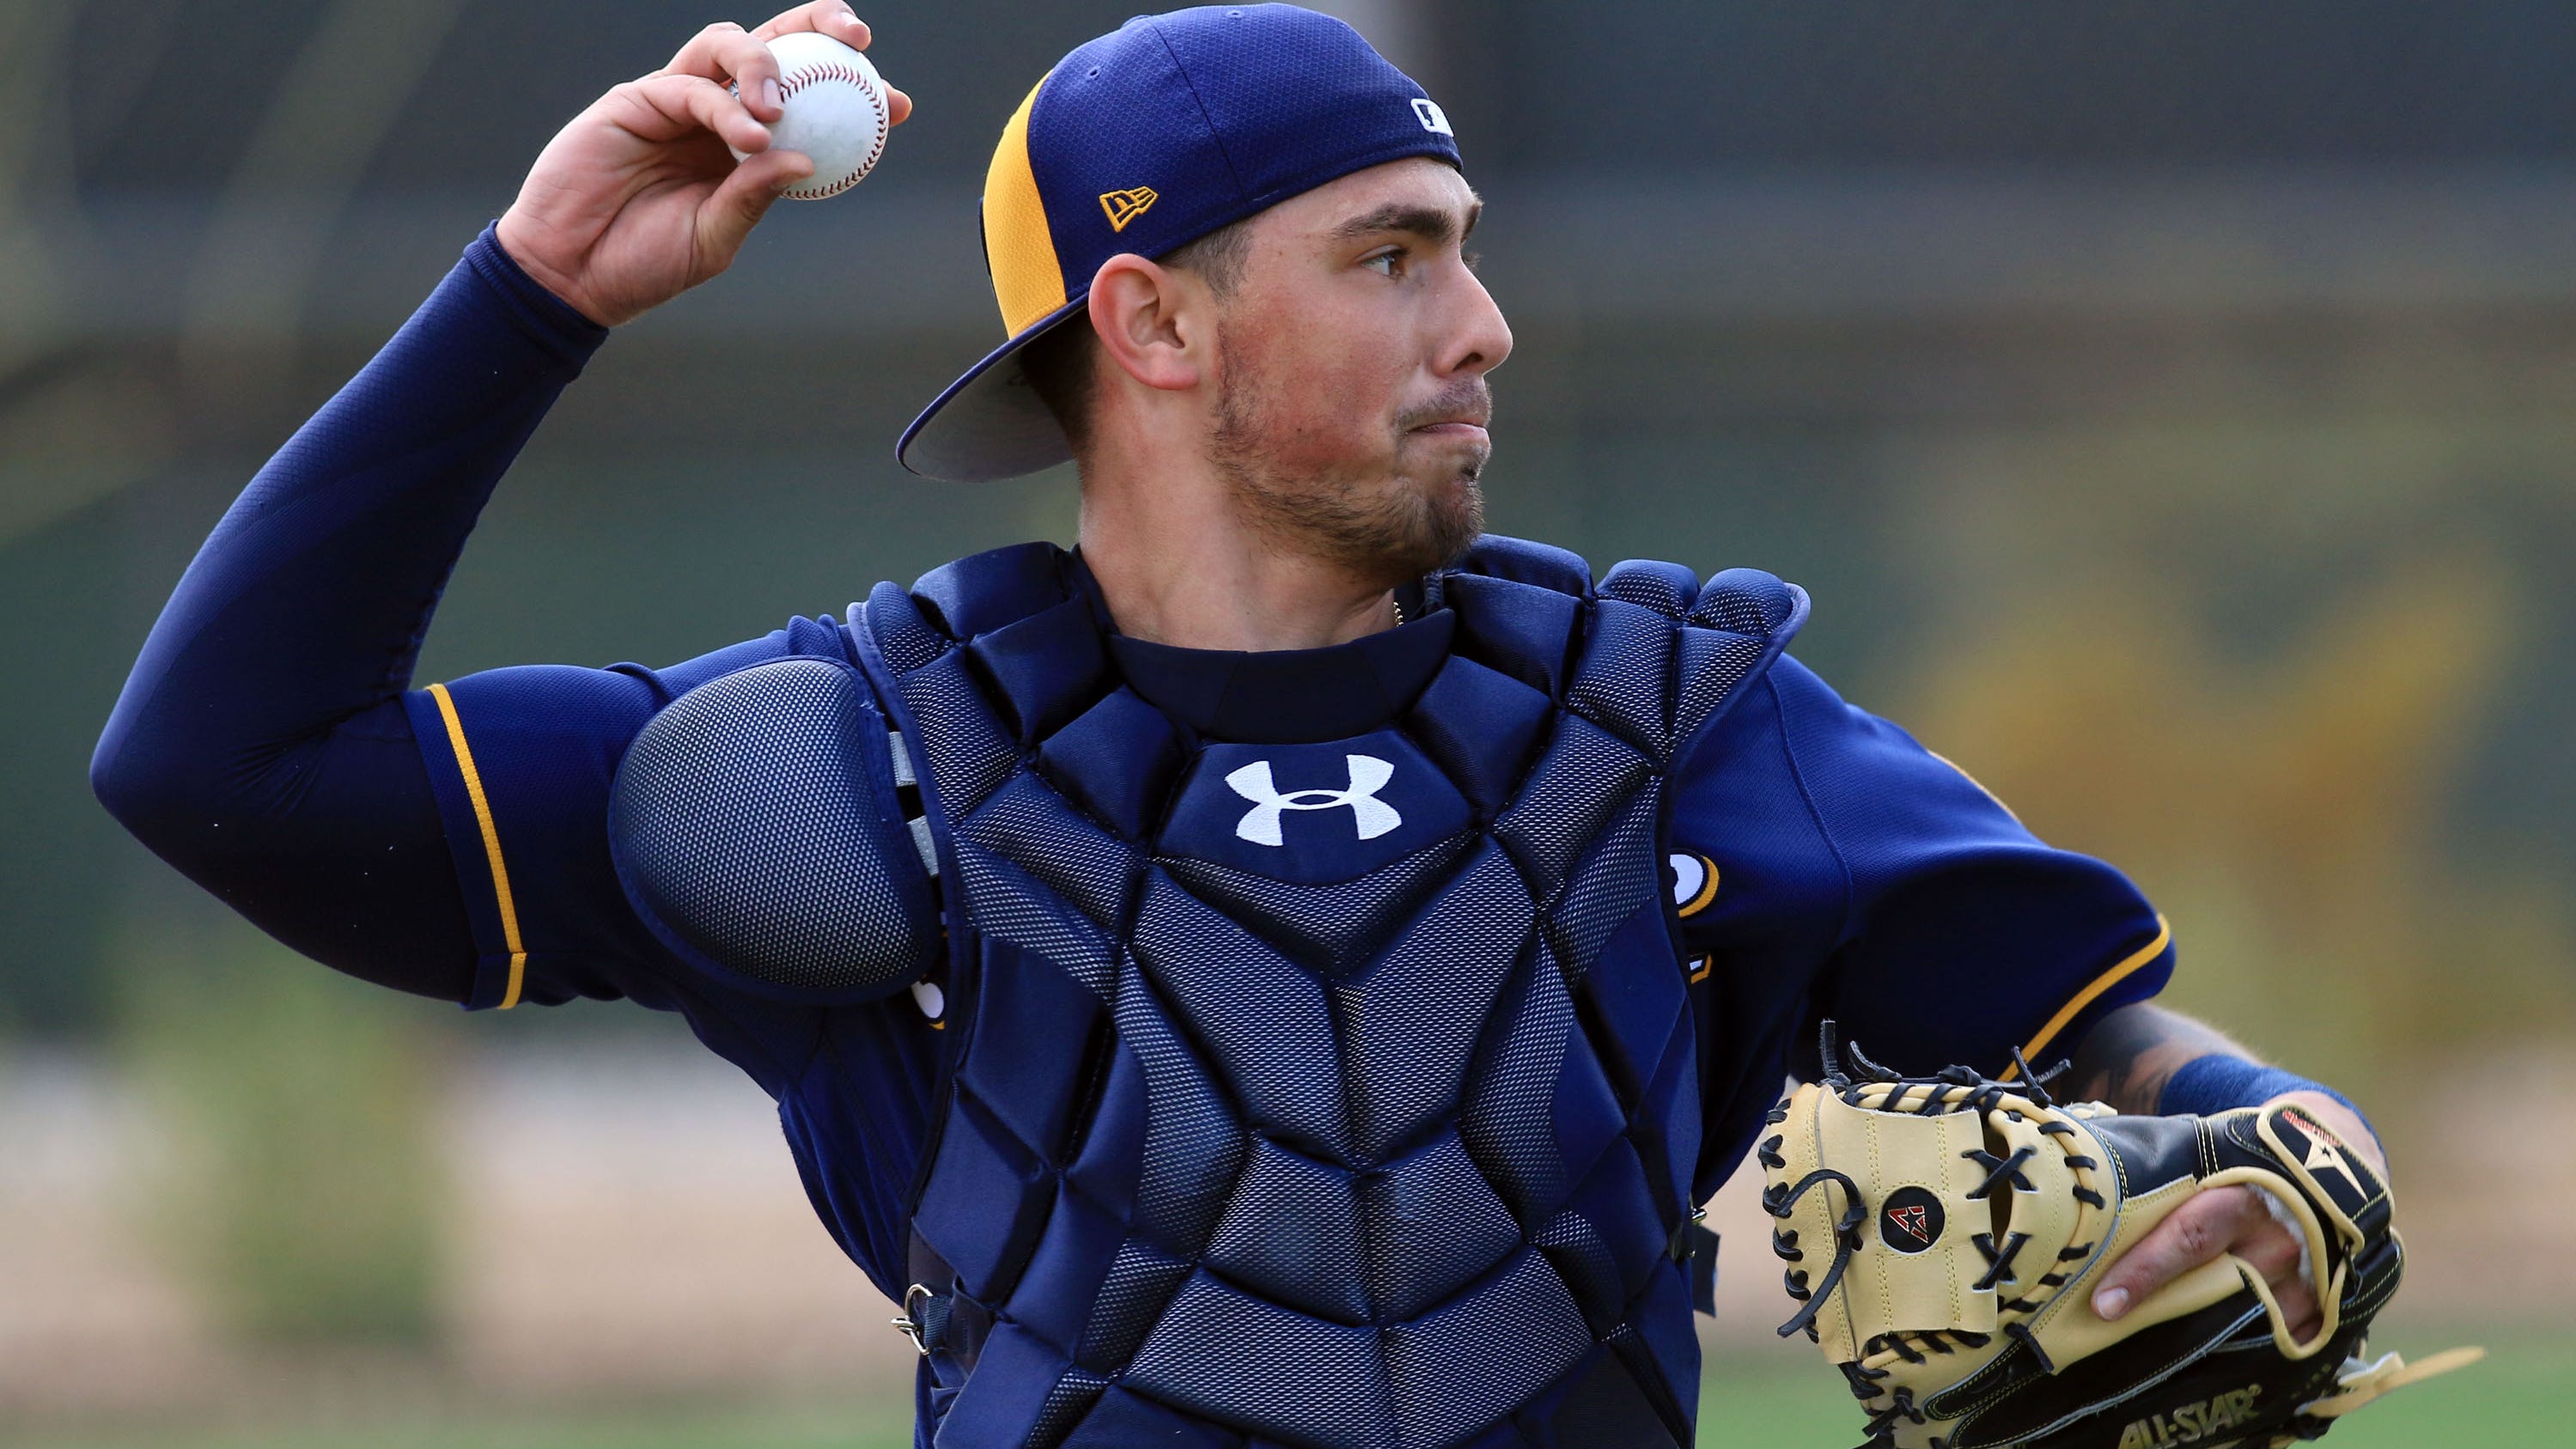 Brewers call up catcher Jacob Nottingham to replace injured Many Piña